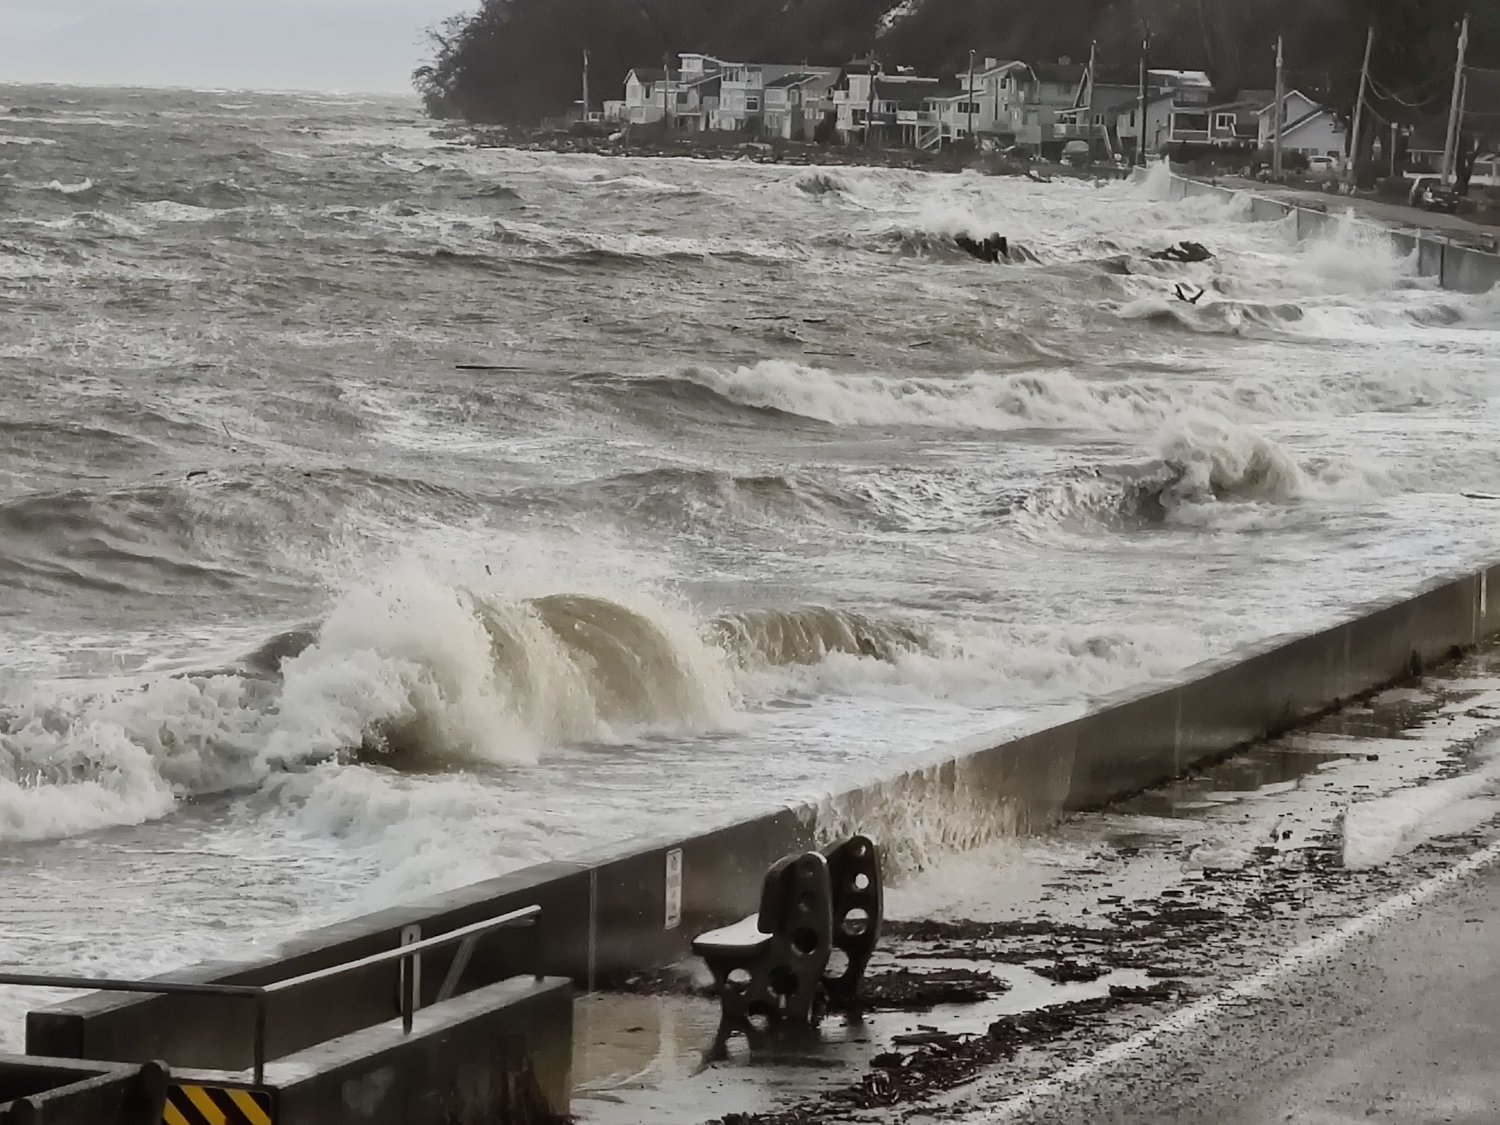 Maple Beach was splashed by raging seas during a recent storm event.